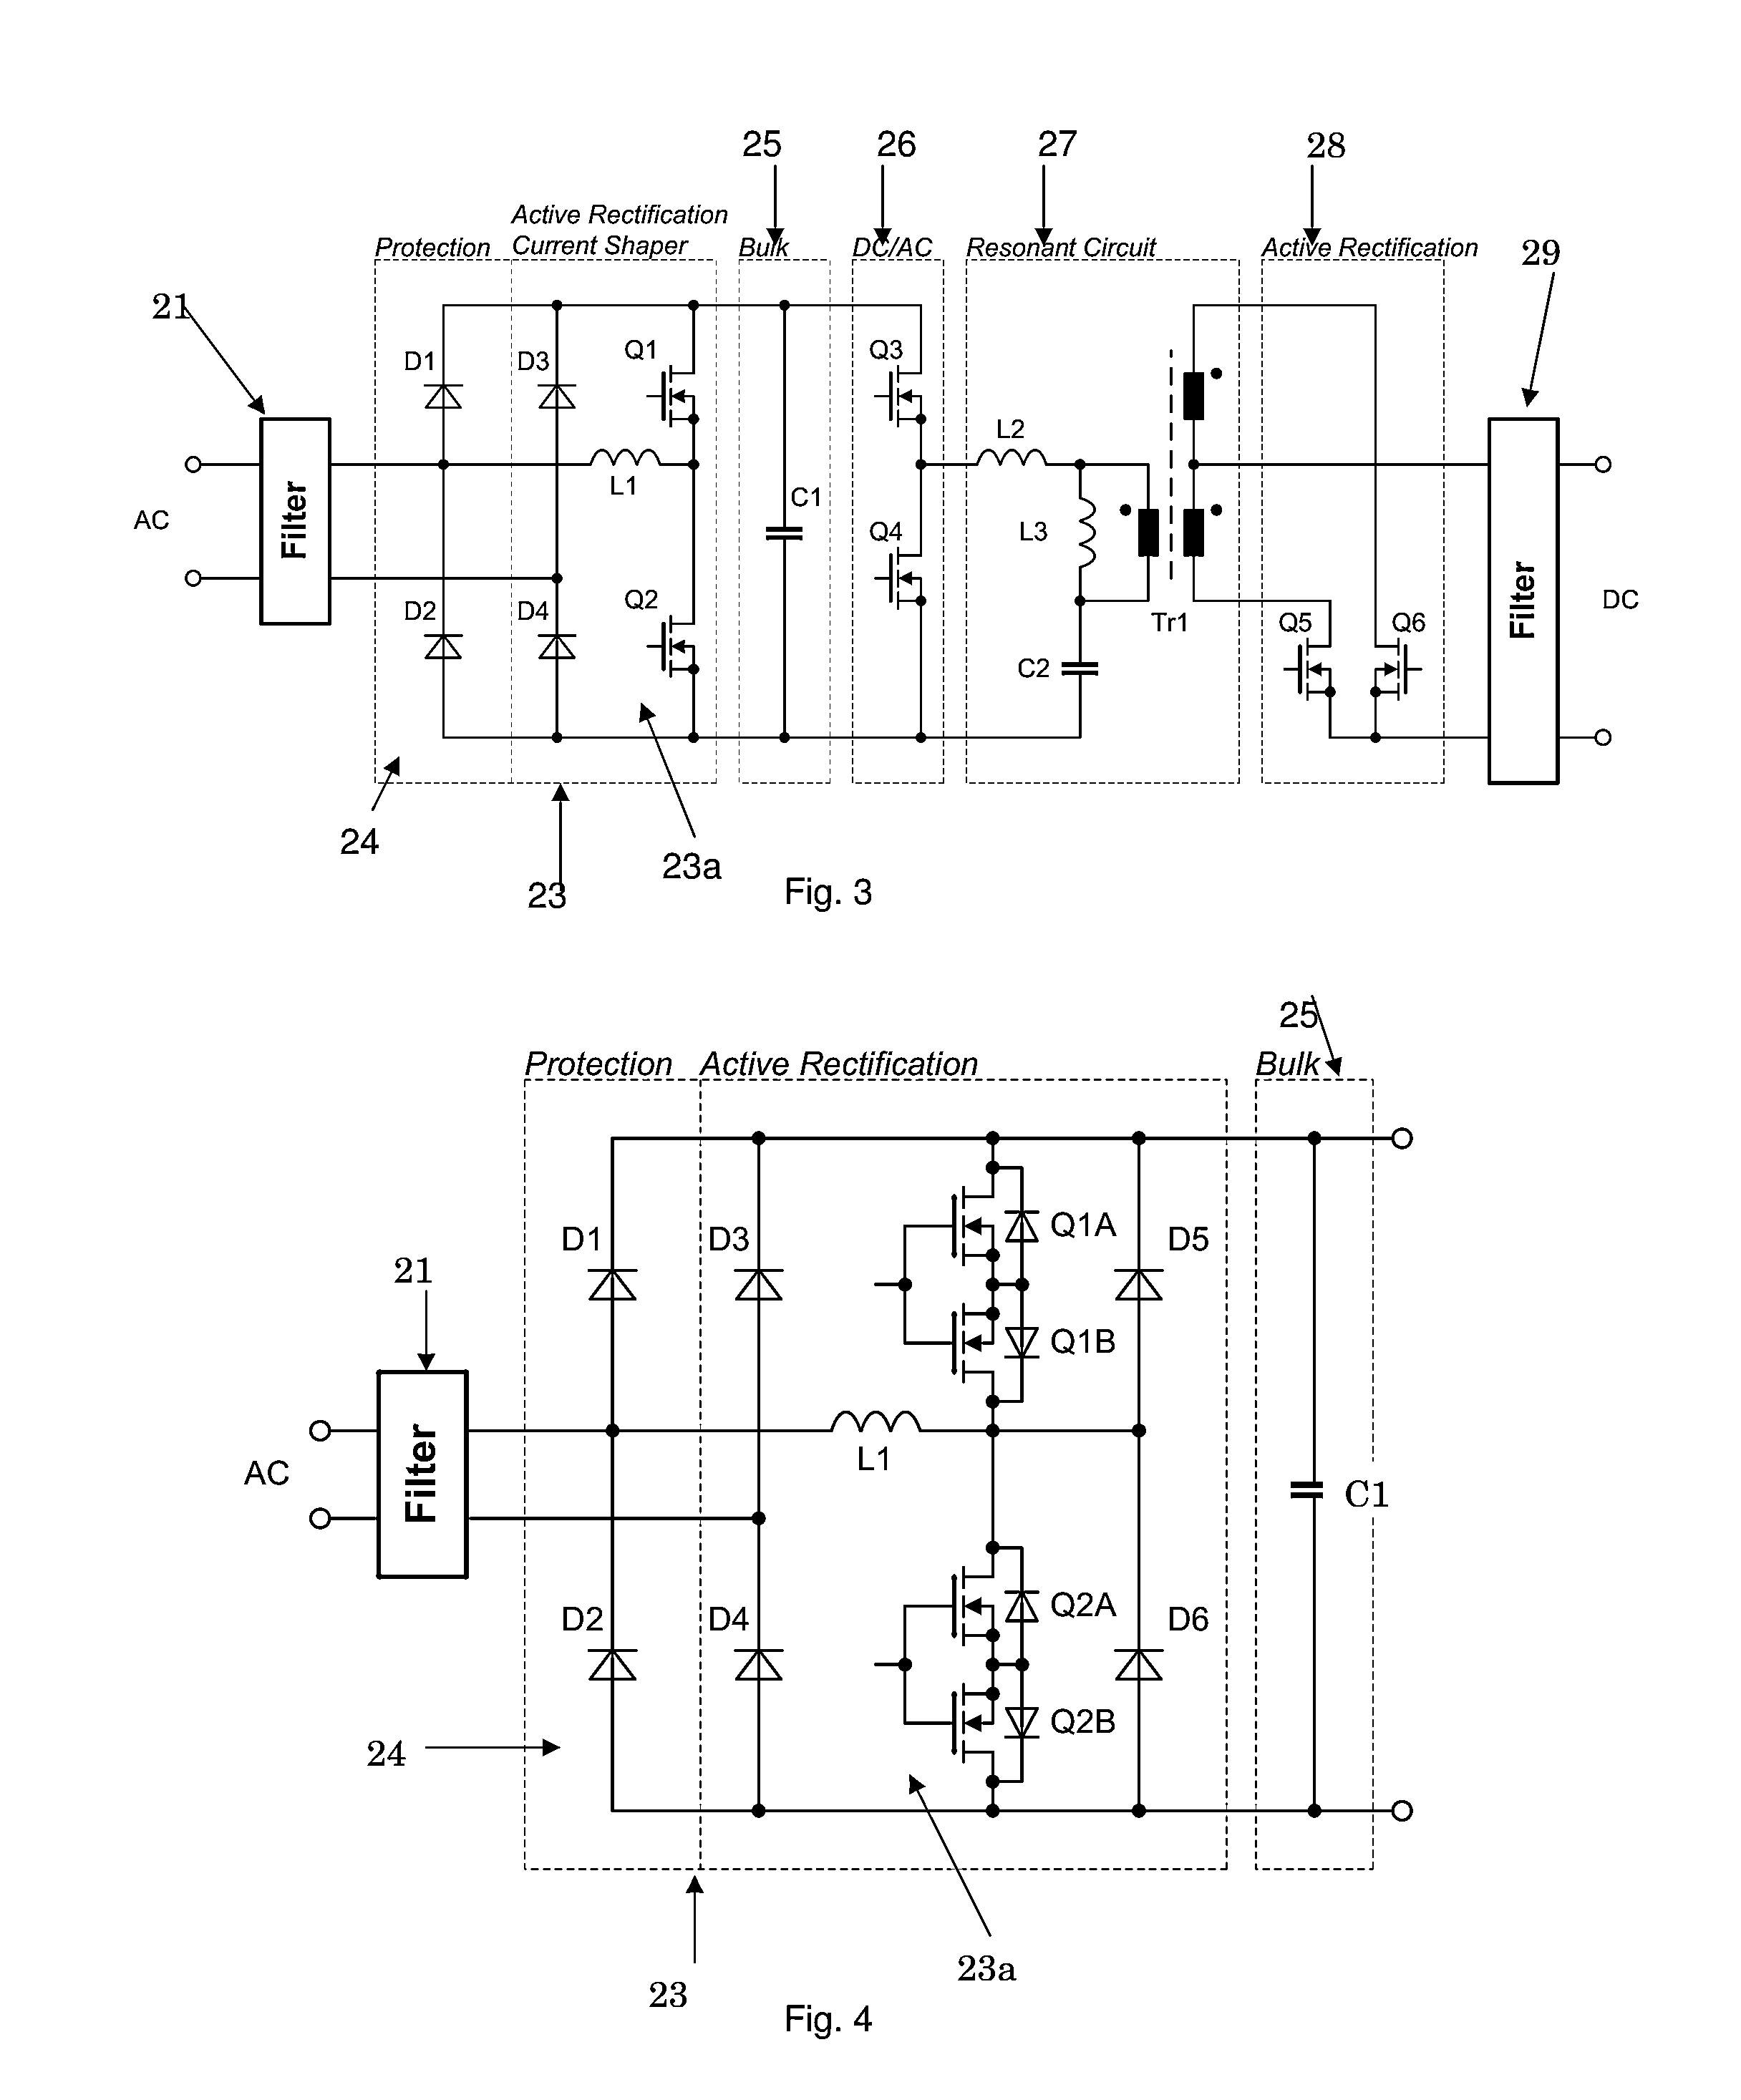 AC/DC power converter with active rectification and input current shaping